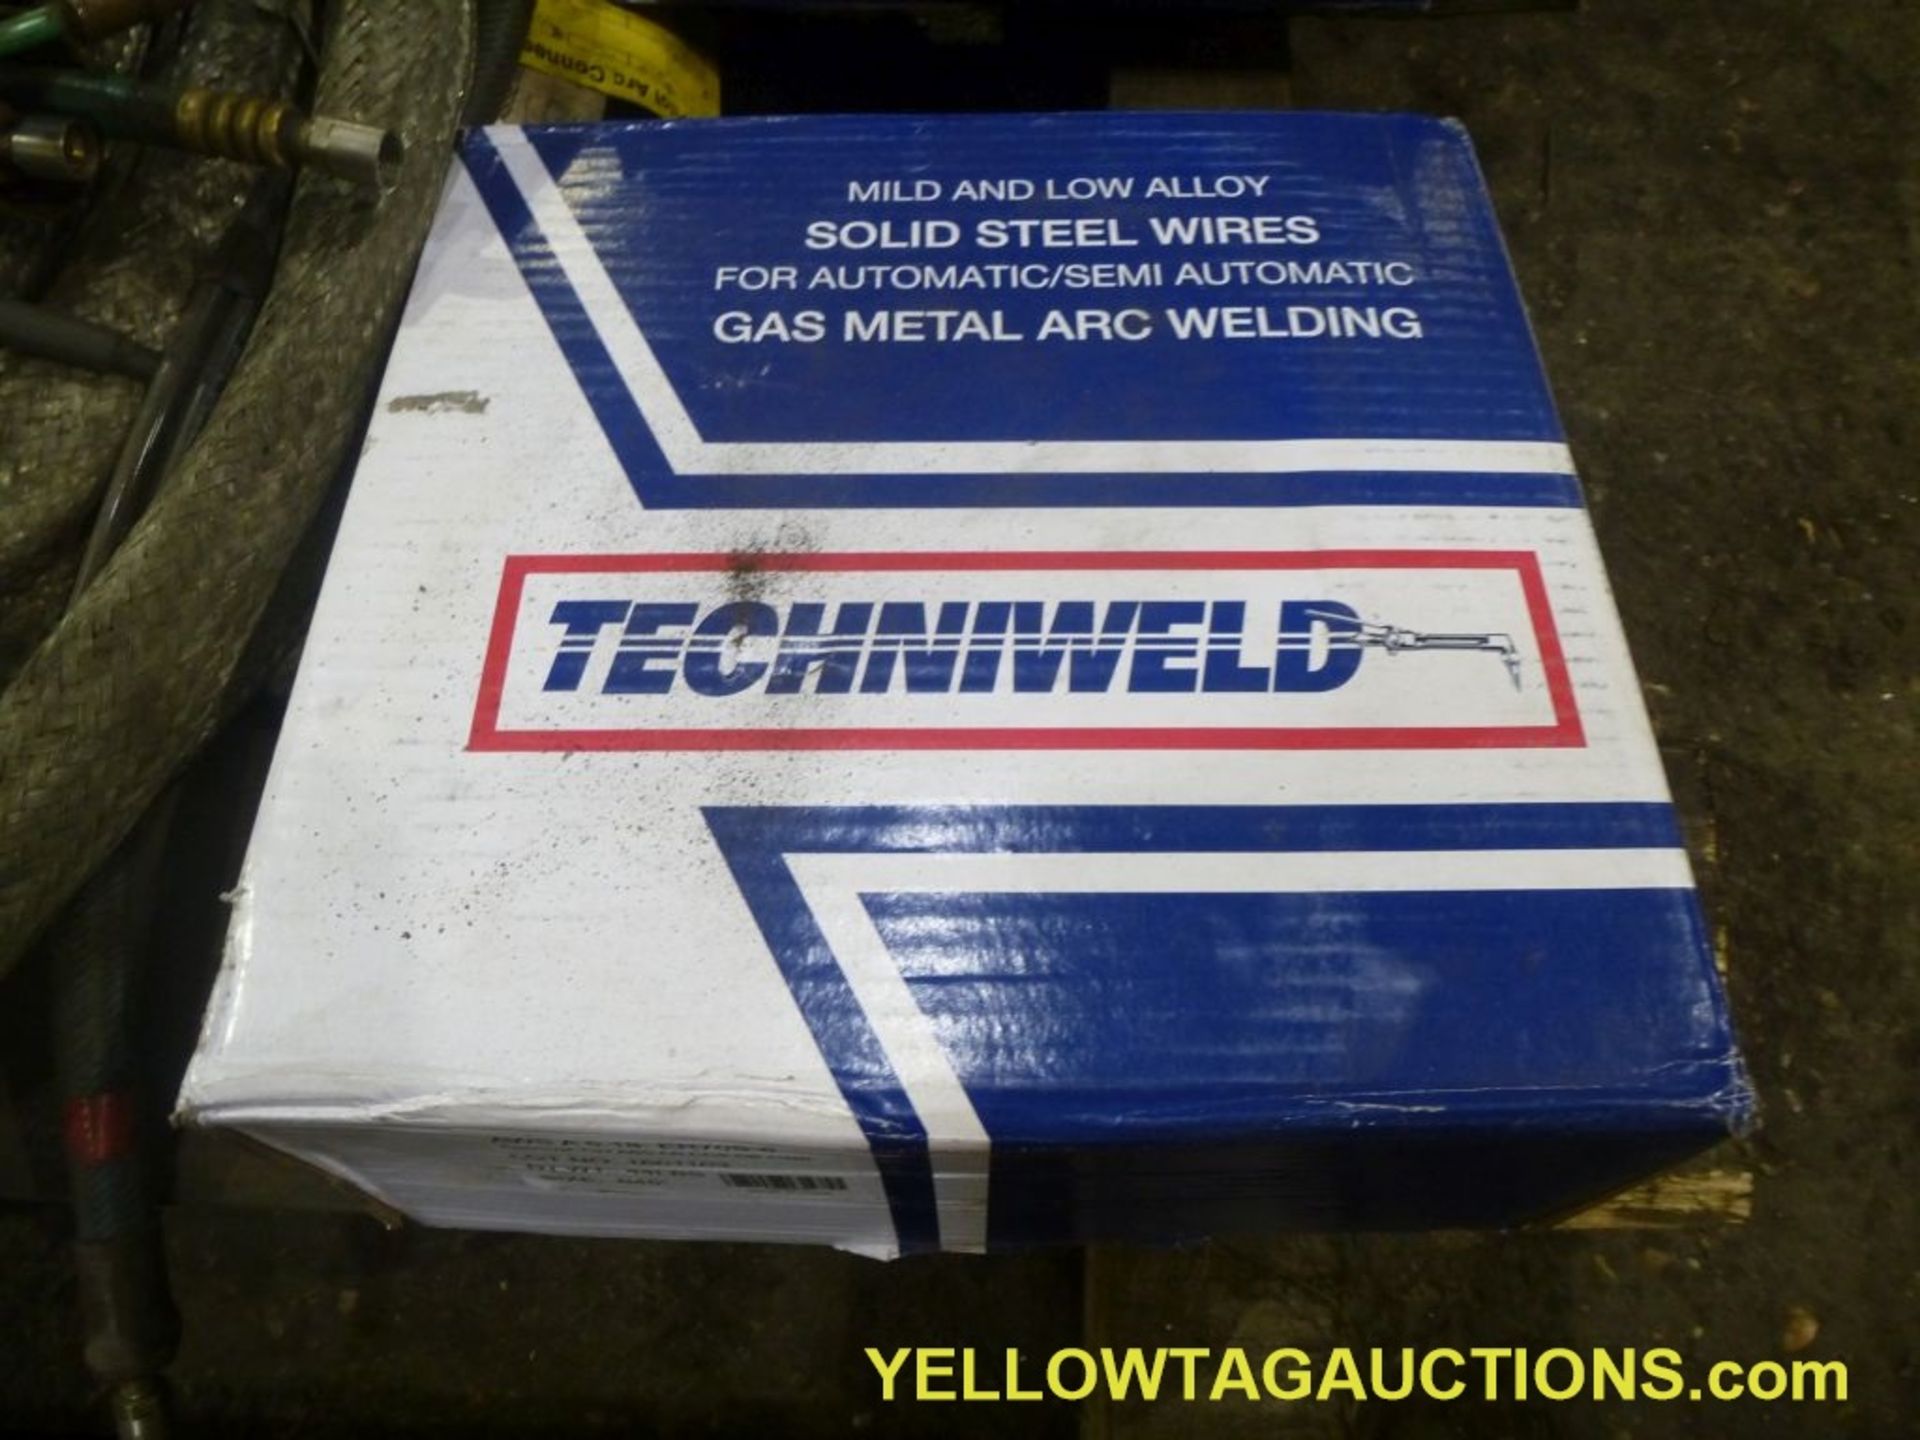 Lot of Assorted Wire and Hose|(2) Boxes of Solid Steel Wires, Gas Metal Arc Welding Wire, Size 0. - Image 3 of 6